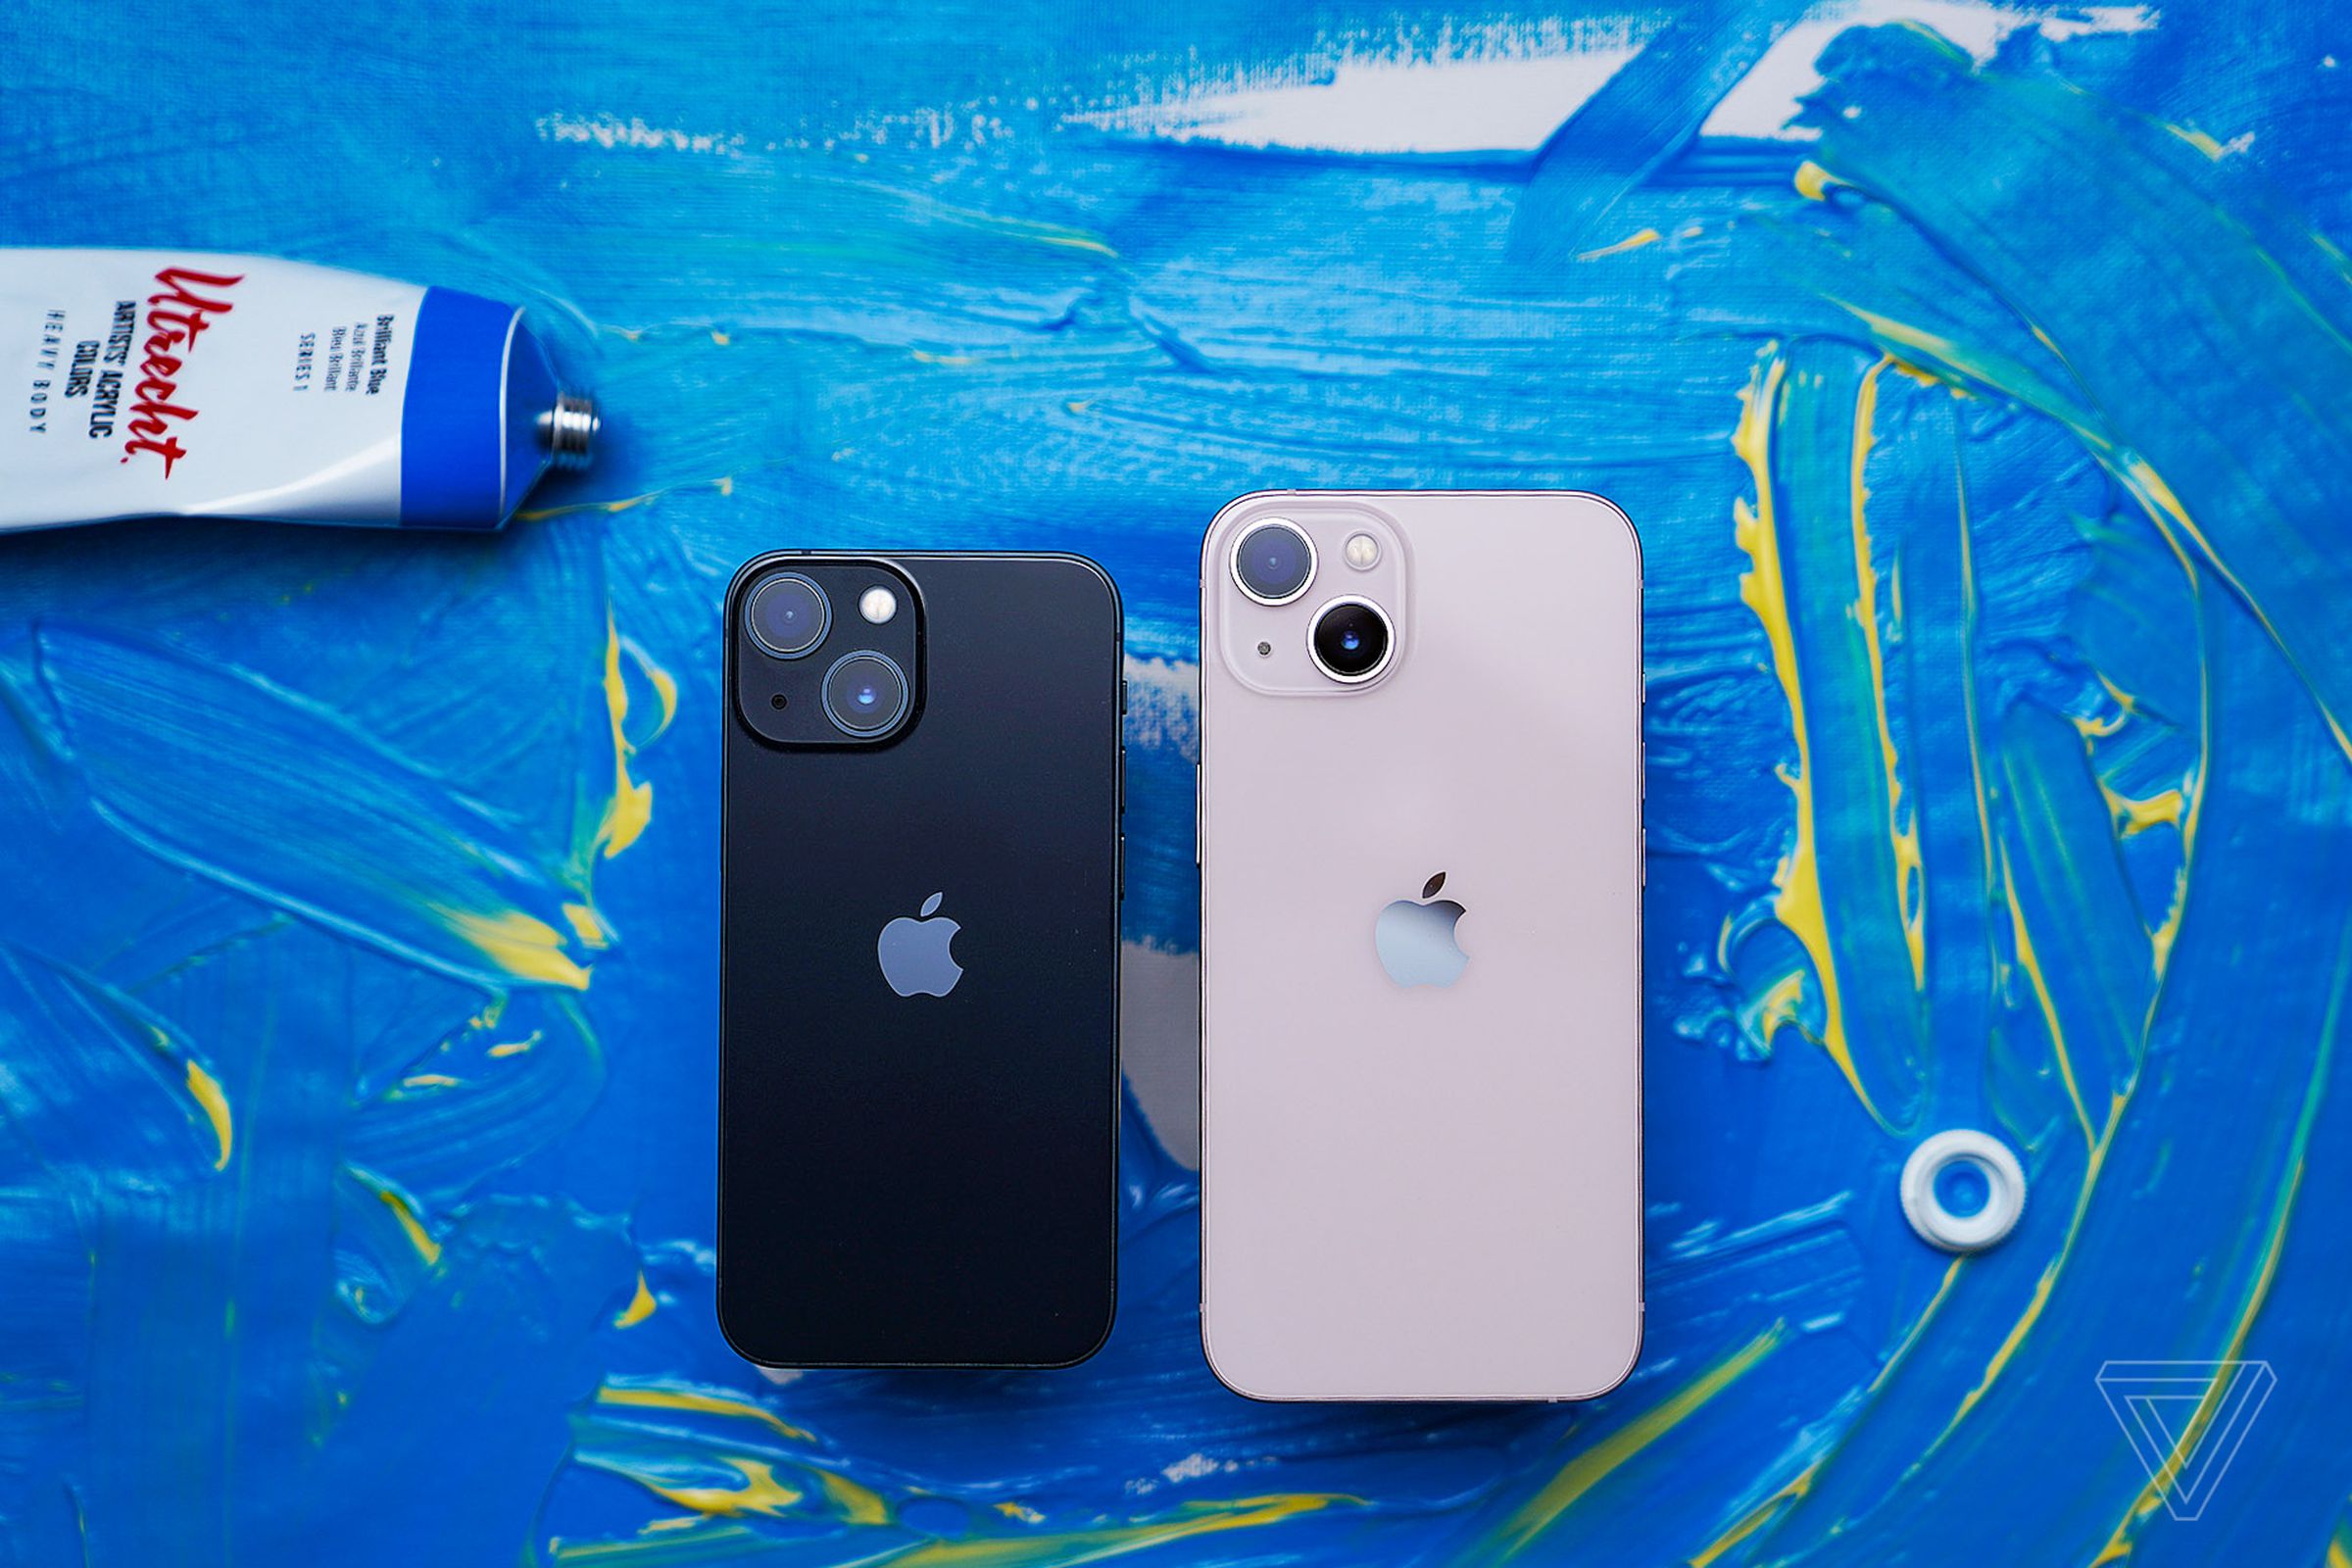 Photo of an iPhone 13 Mini next to a regular-sized iPhone 13 on a blue painted background.